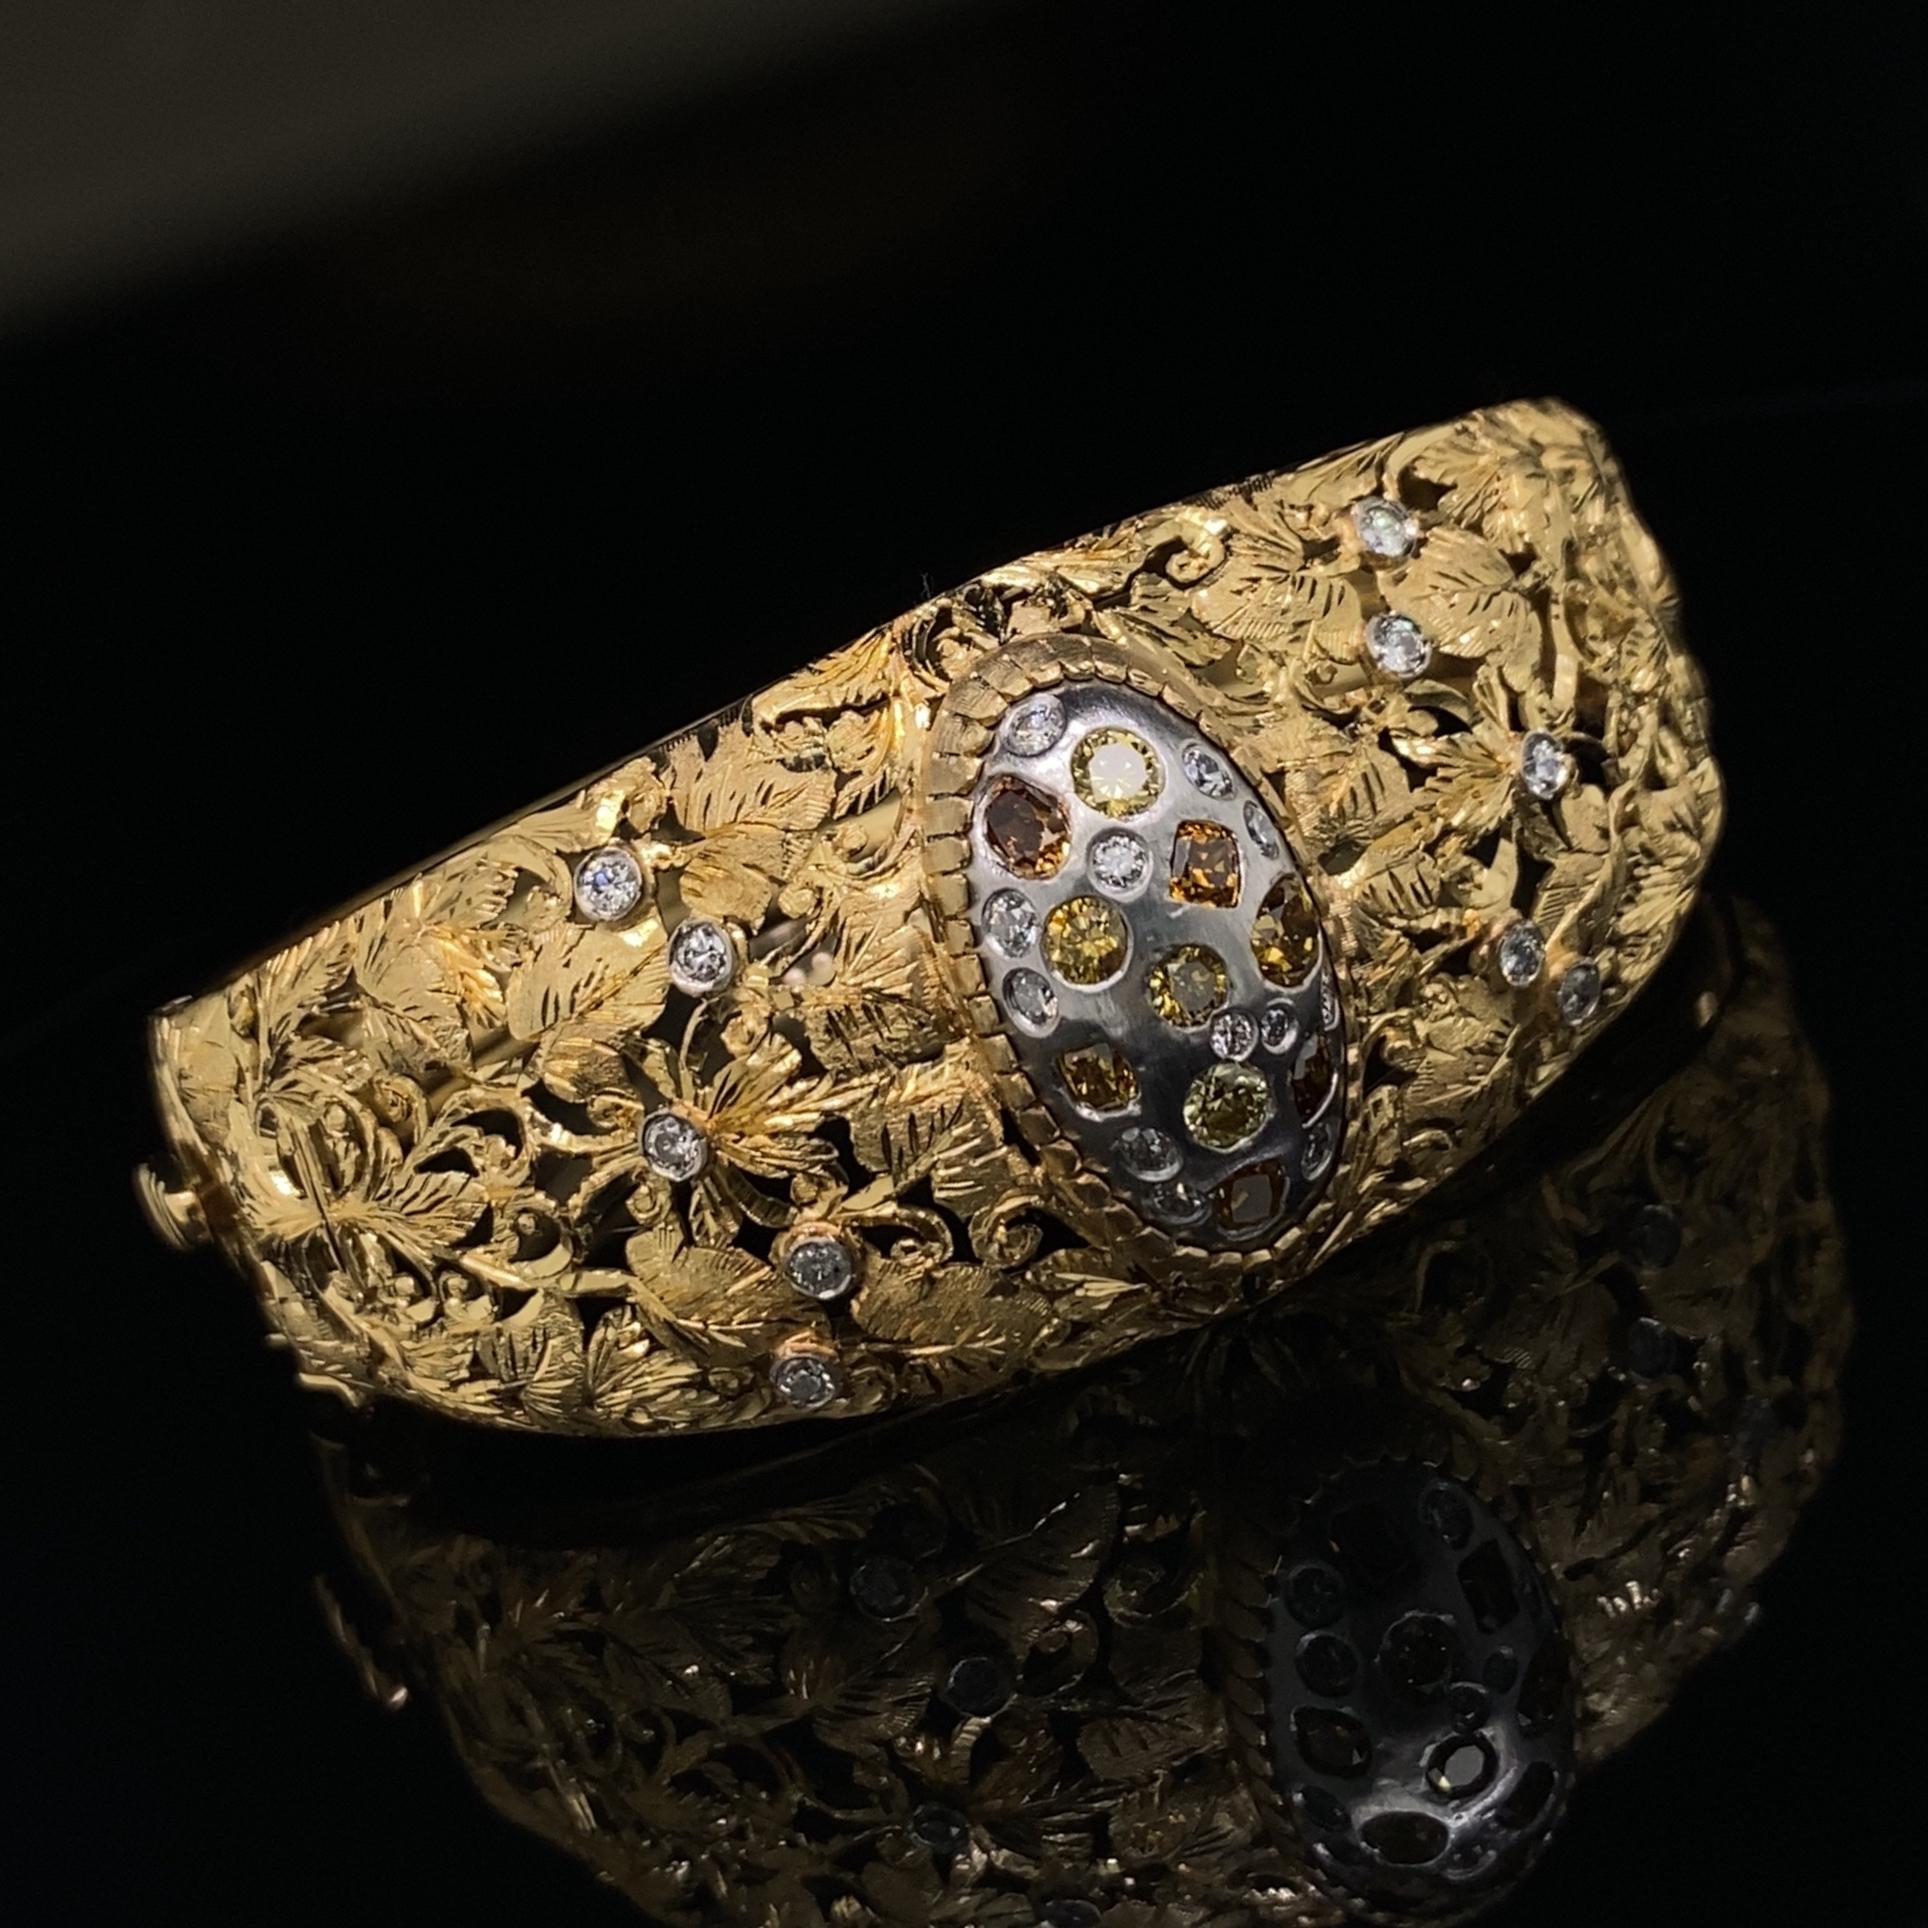 This beautifully made, 18 karat yellow gold cuff came to us with a dreary smoky quartz set in the center.  Eytan Brandes jettisoned the questionable quartz then fashioned a 14 karat white gold plate to fit the center, then set it with a beautiful